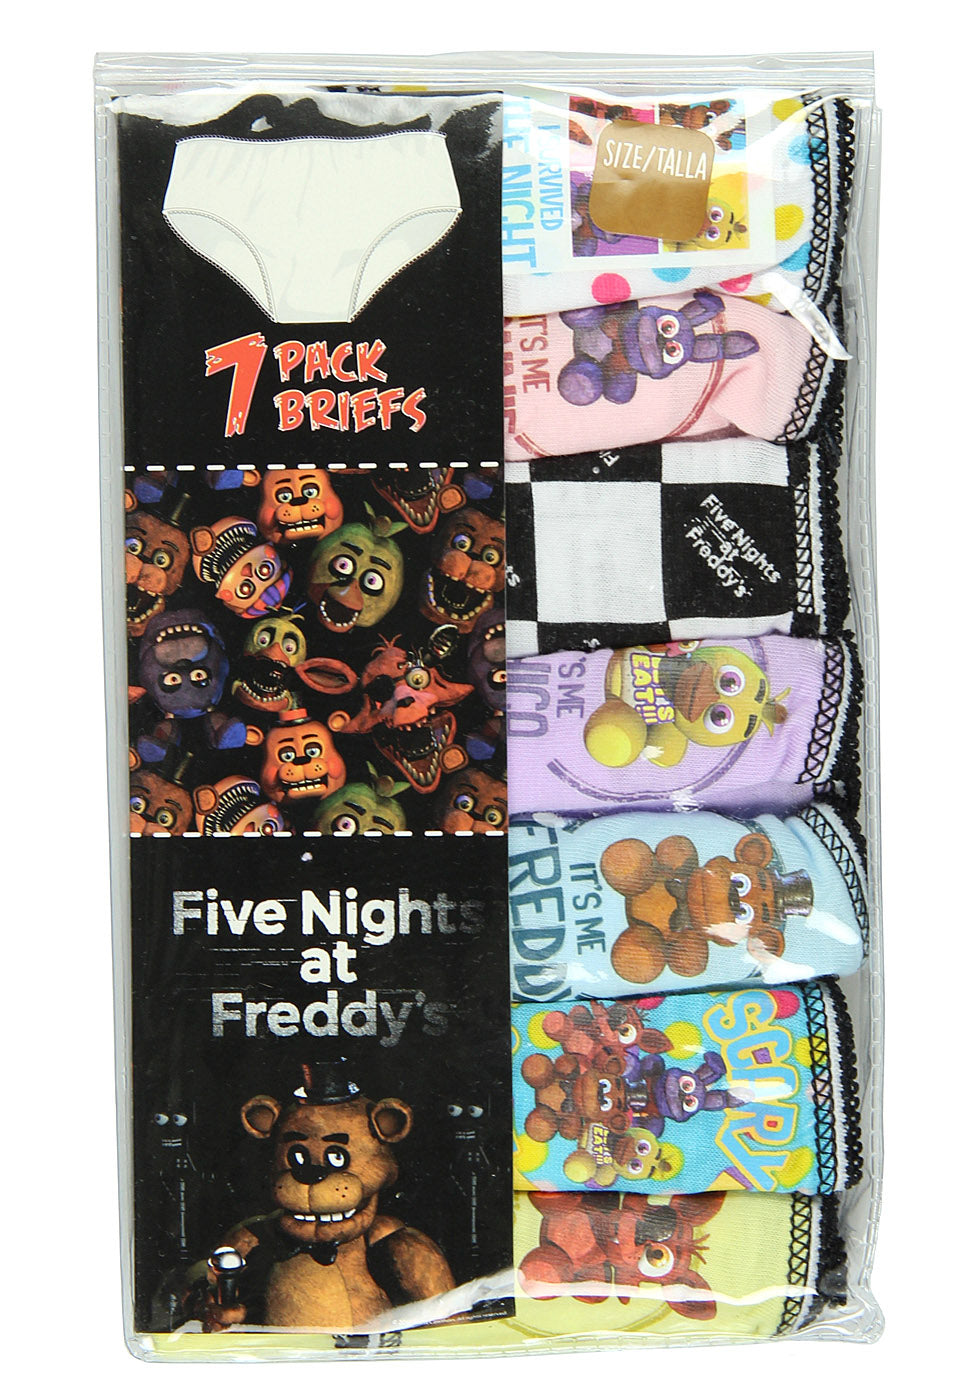 Five Nights at Freddys Little Girls 7 Pack Brief Style Panties